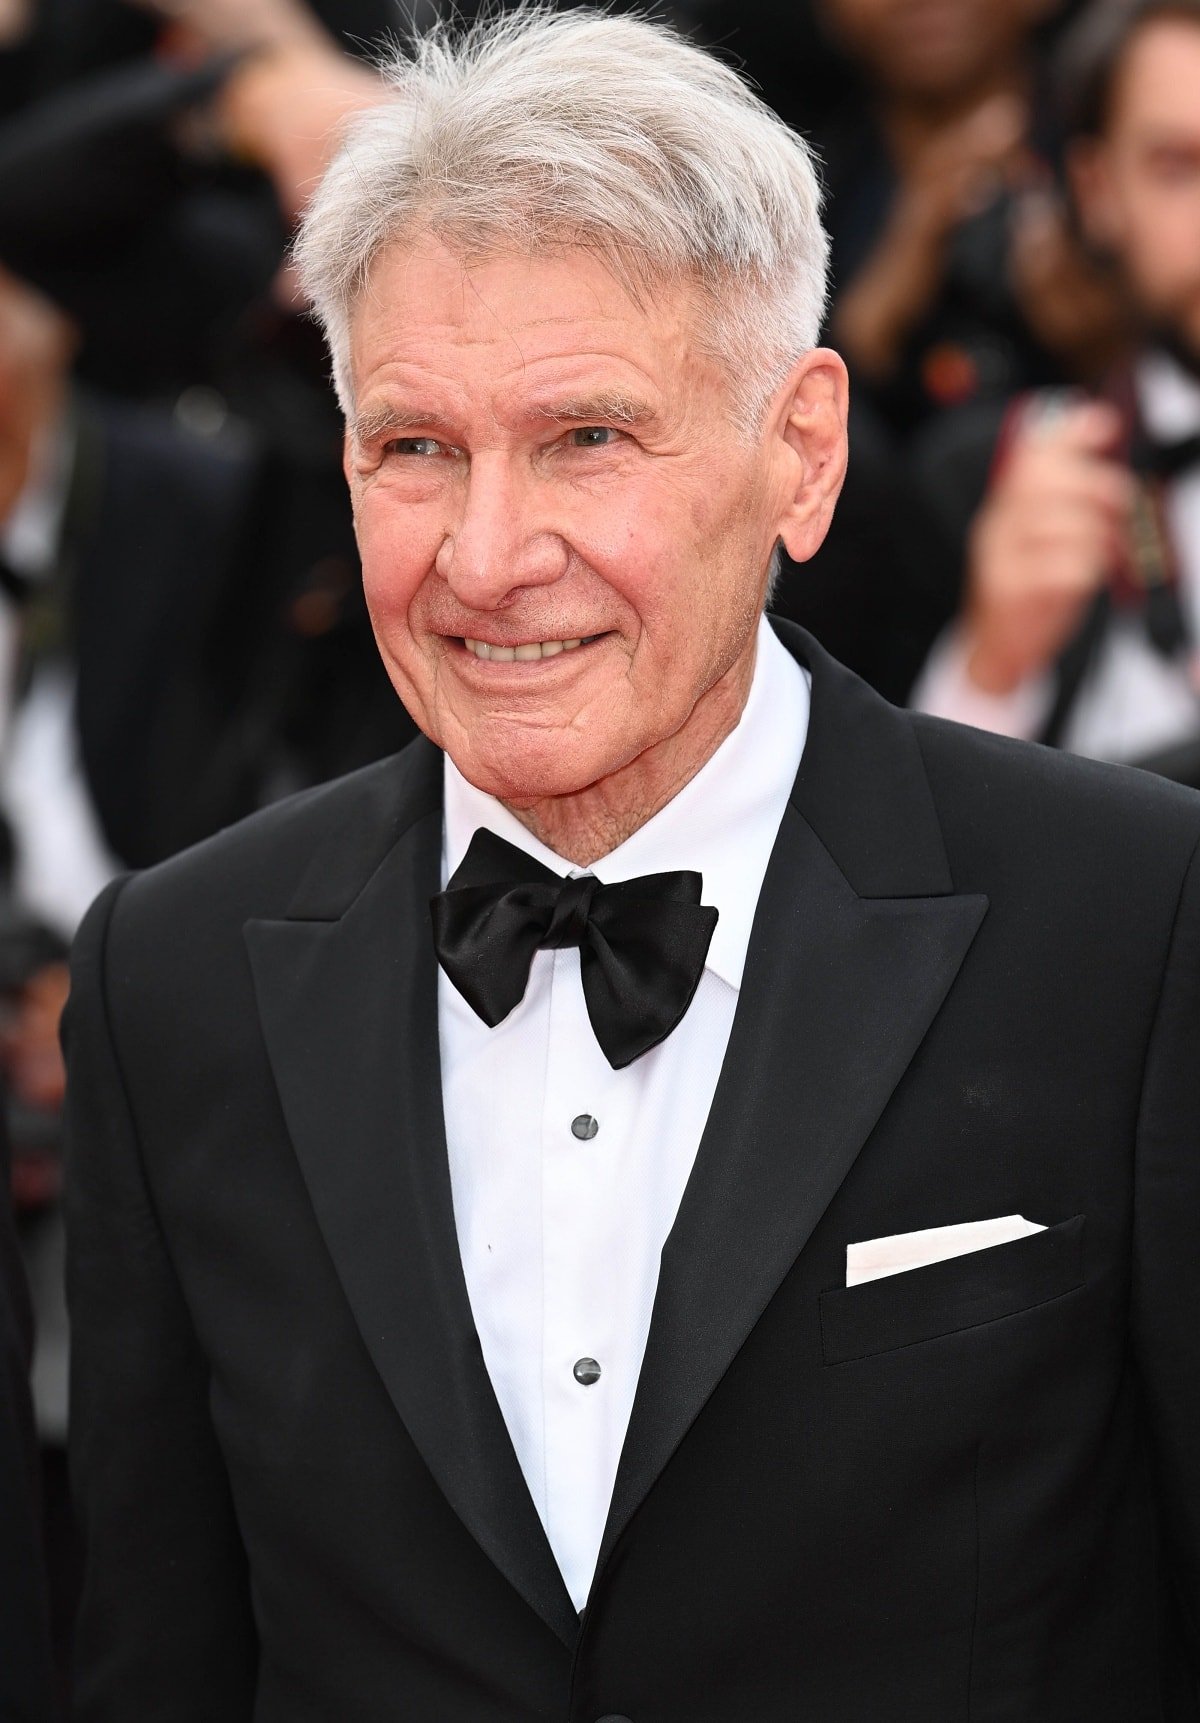 Harrison Ford looking dapper in his classic black tuxedo with a black bowtie